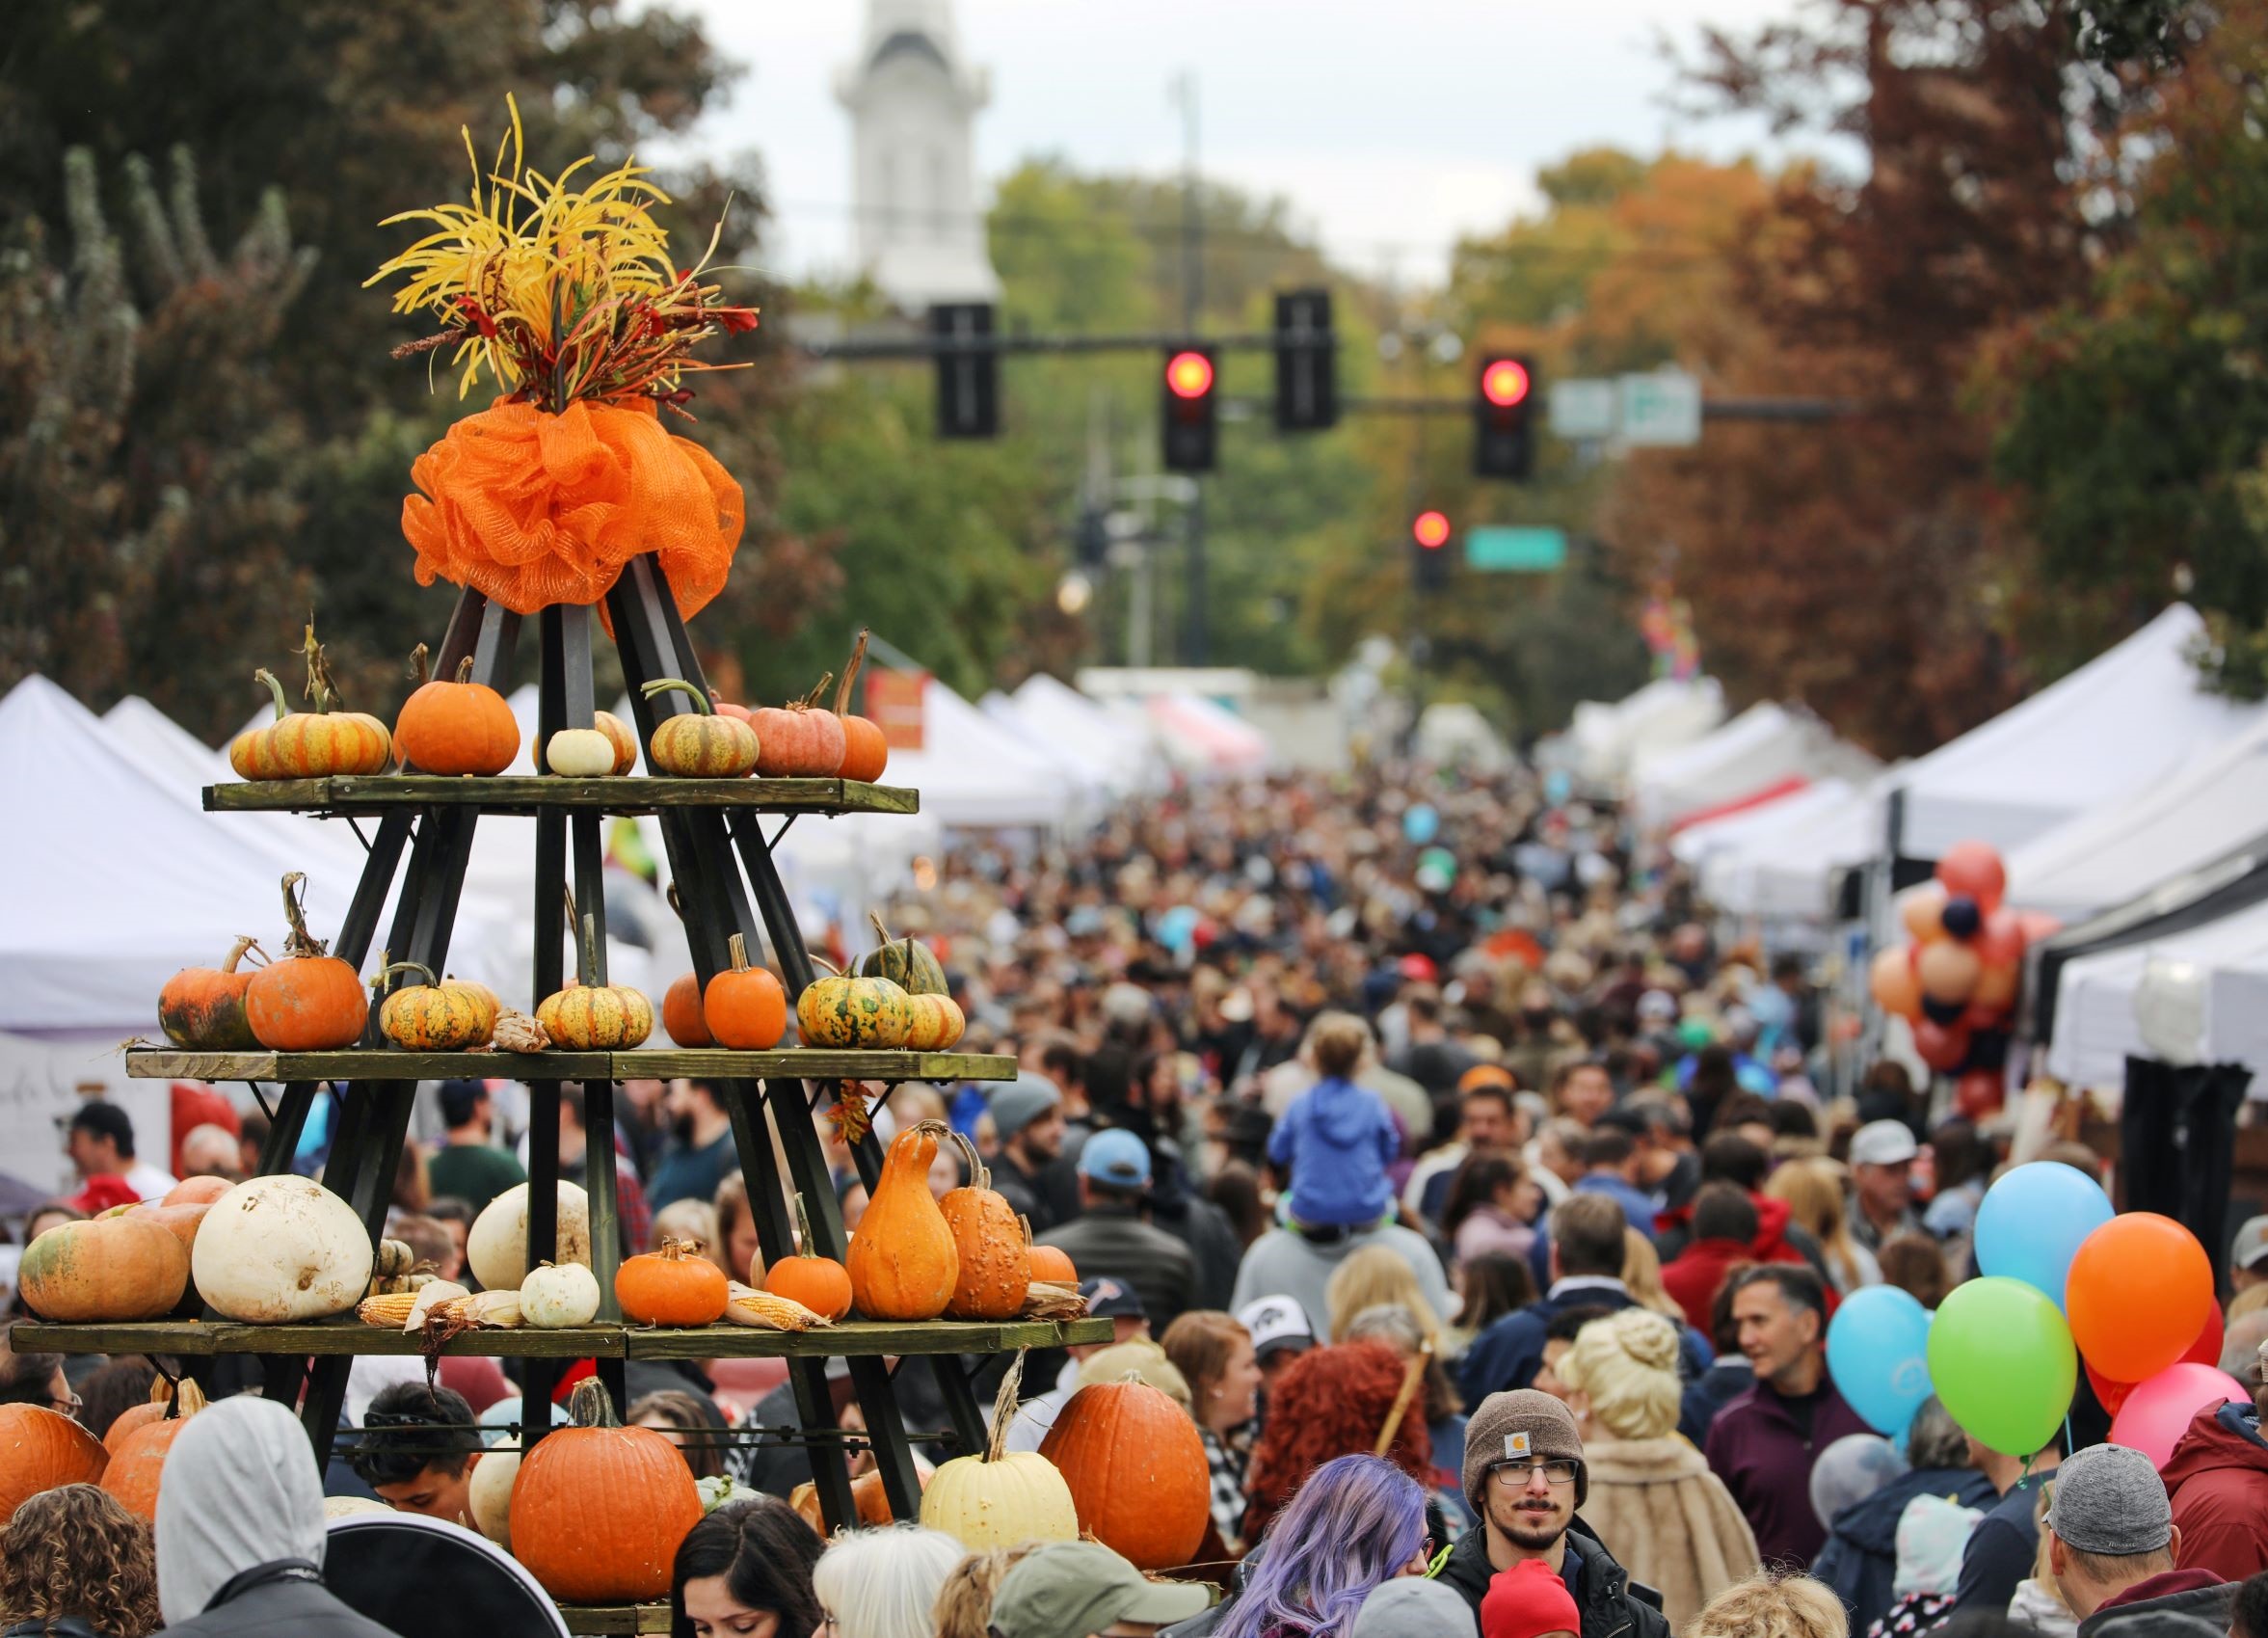 Family Fun Spend Fall With the Family at the 36th Annual Pumpkinfest